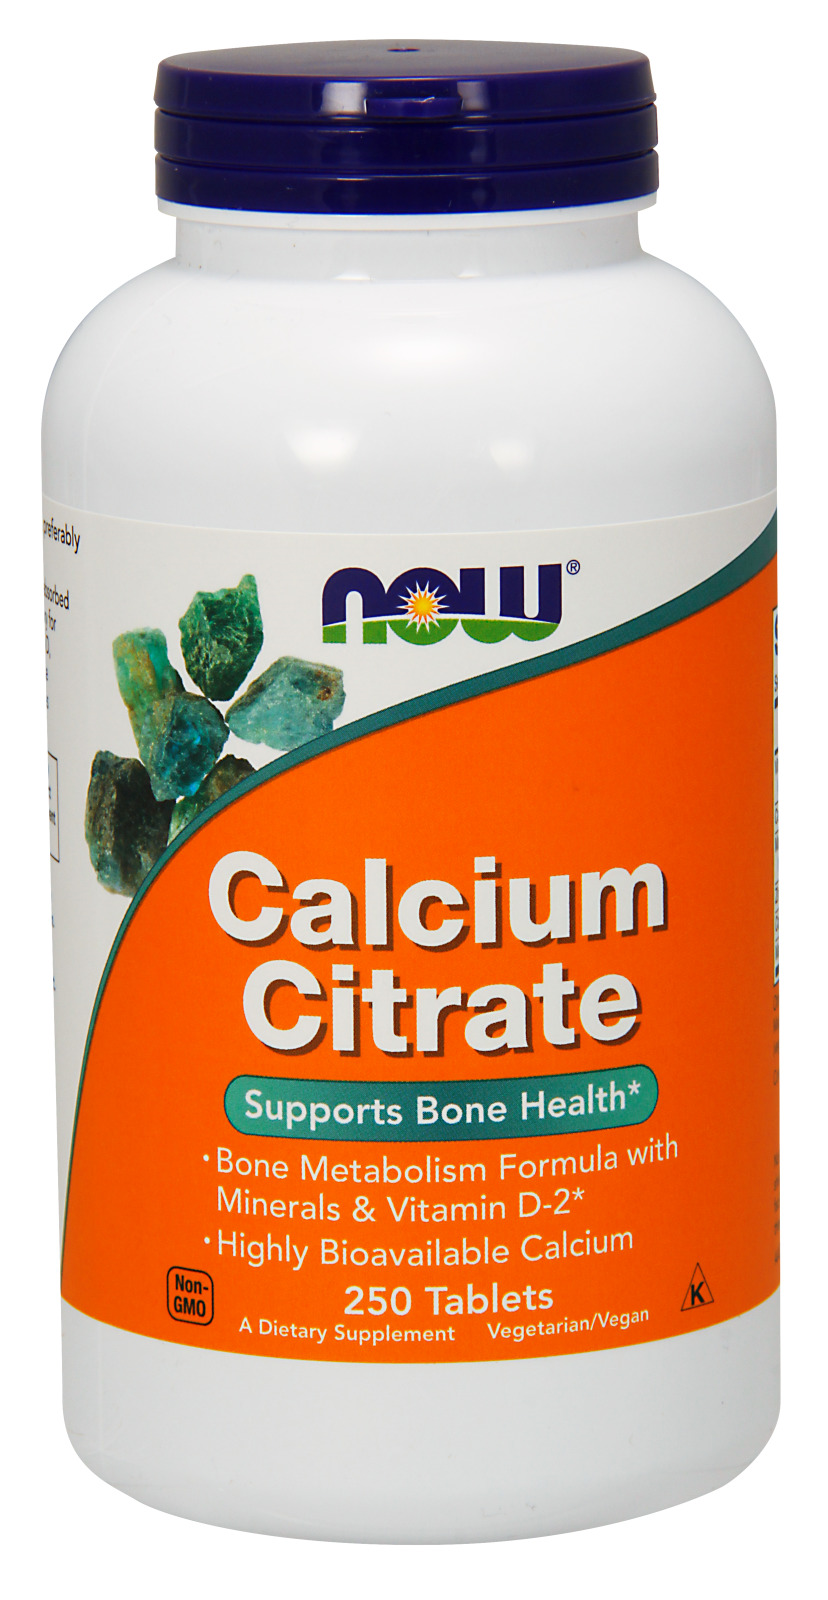 Calcium Citrate Tablets - The Daily Apple